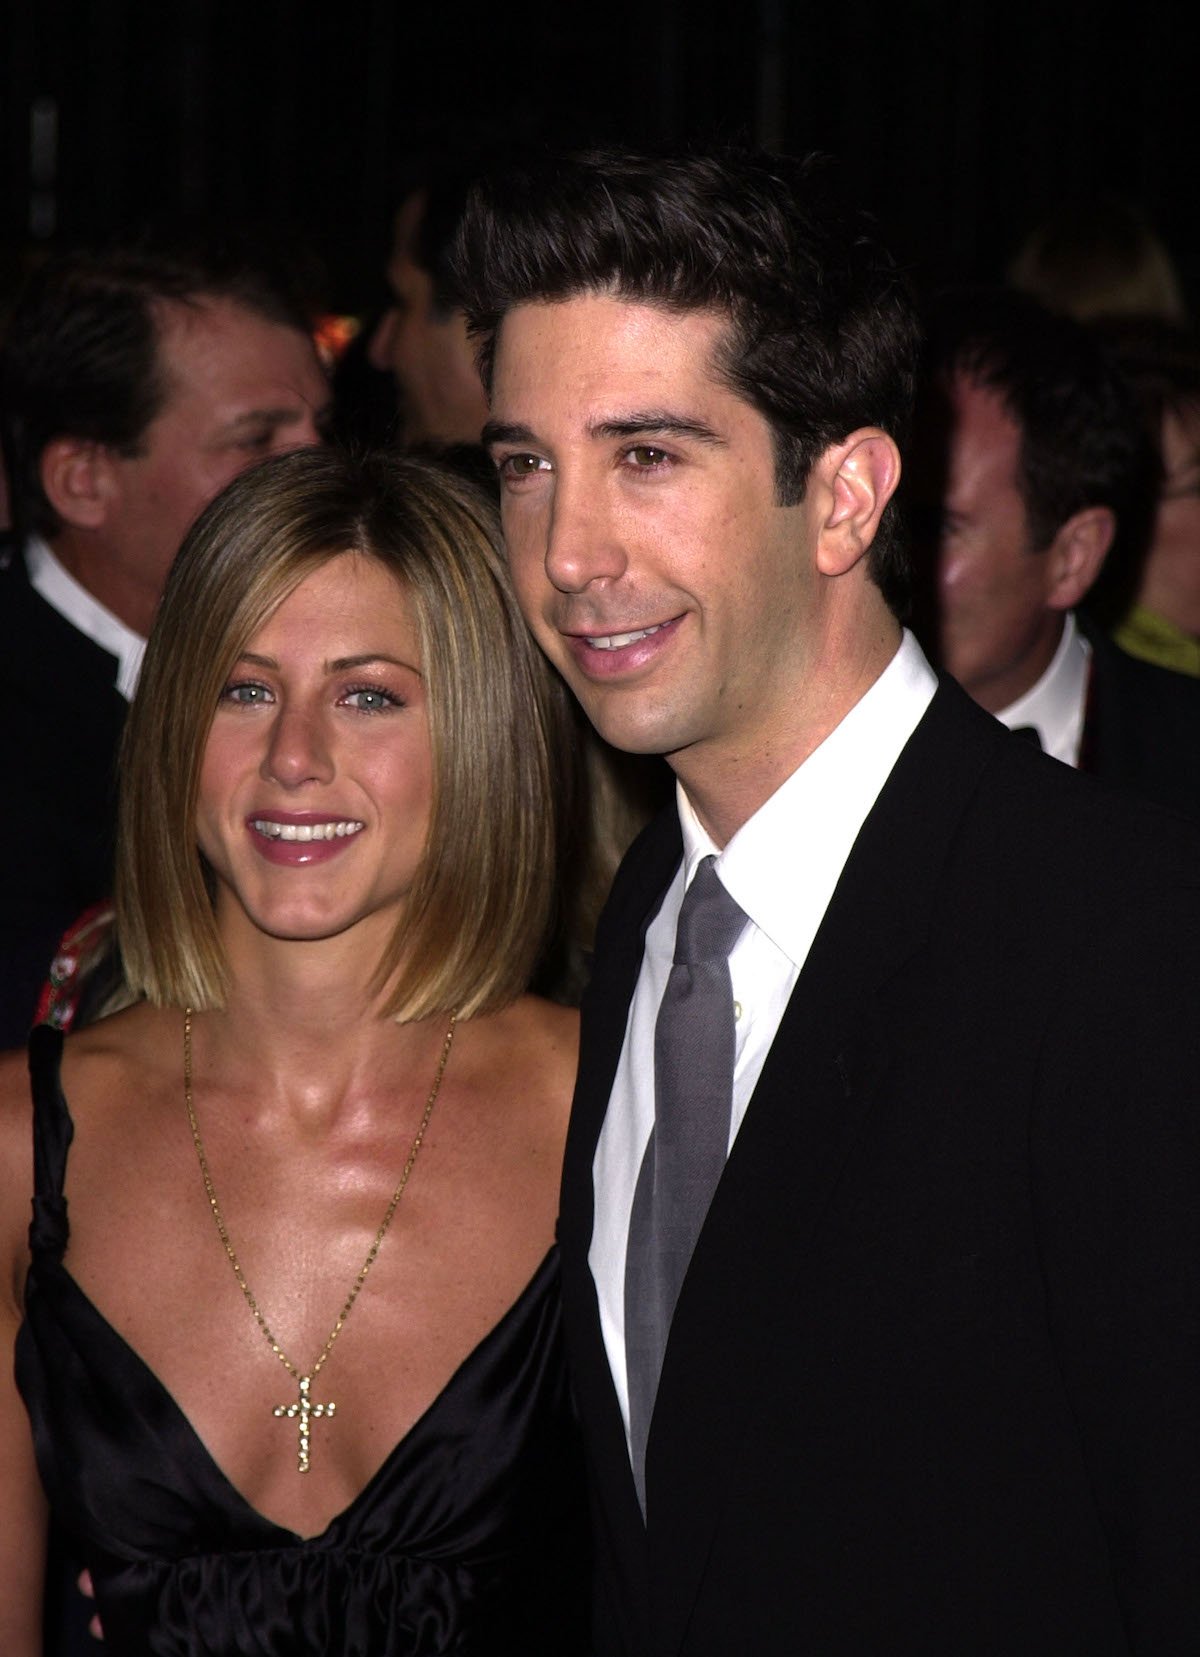 Jennifer Aniston and David Schwimmer dressed in black, standing side by side at a formal event.